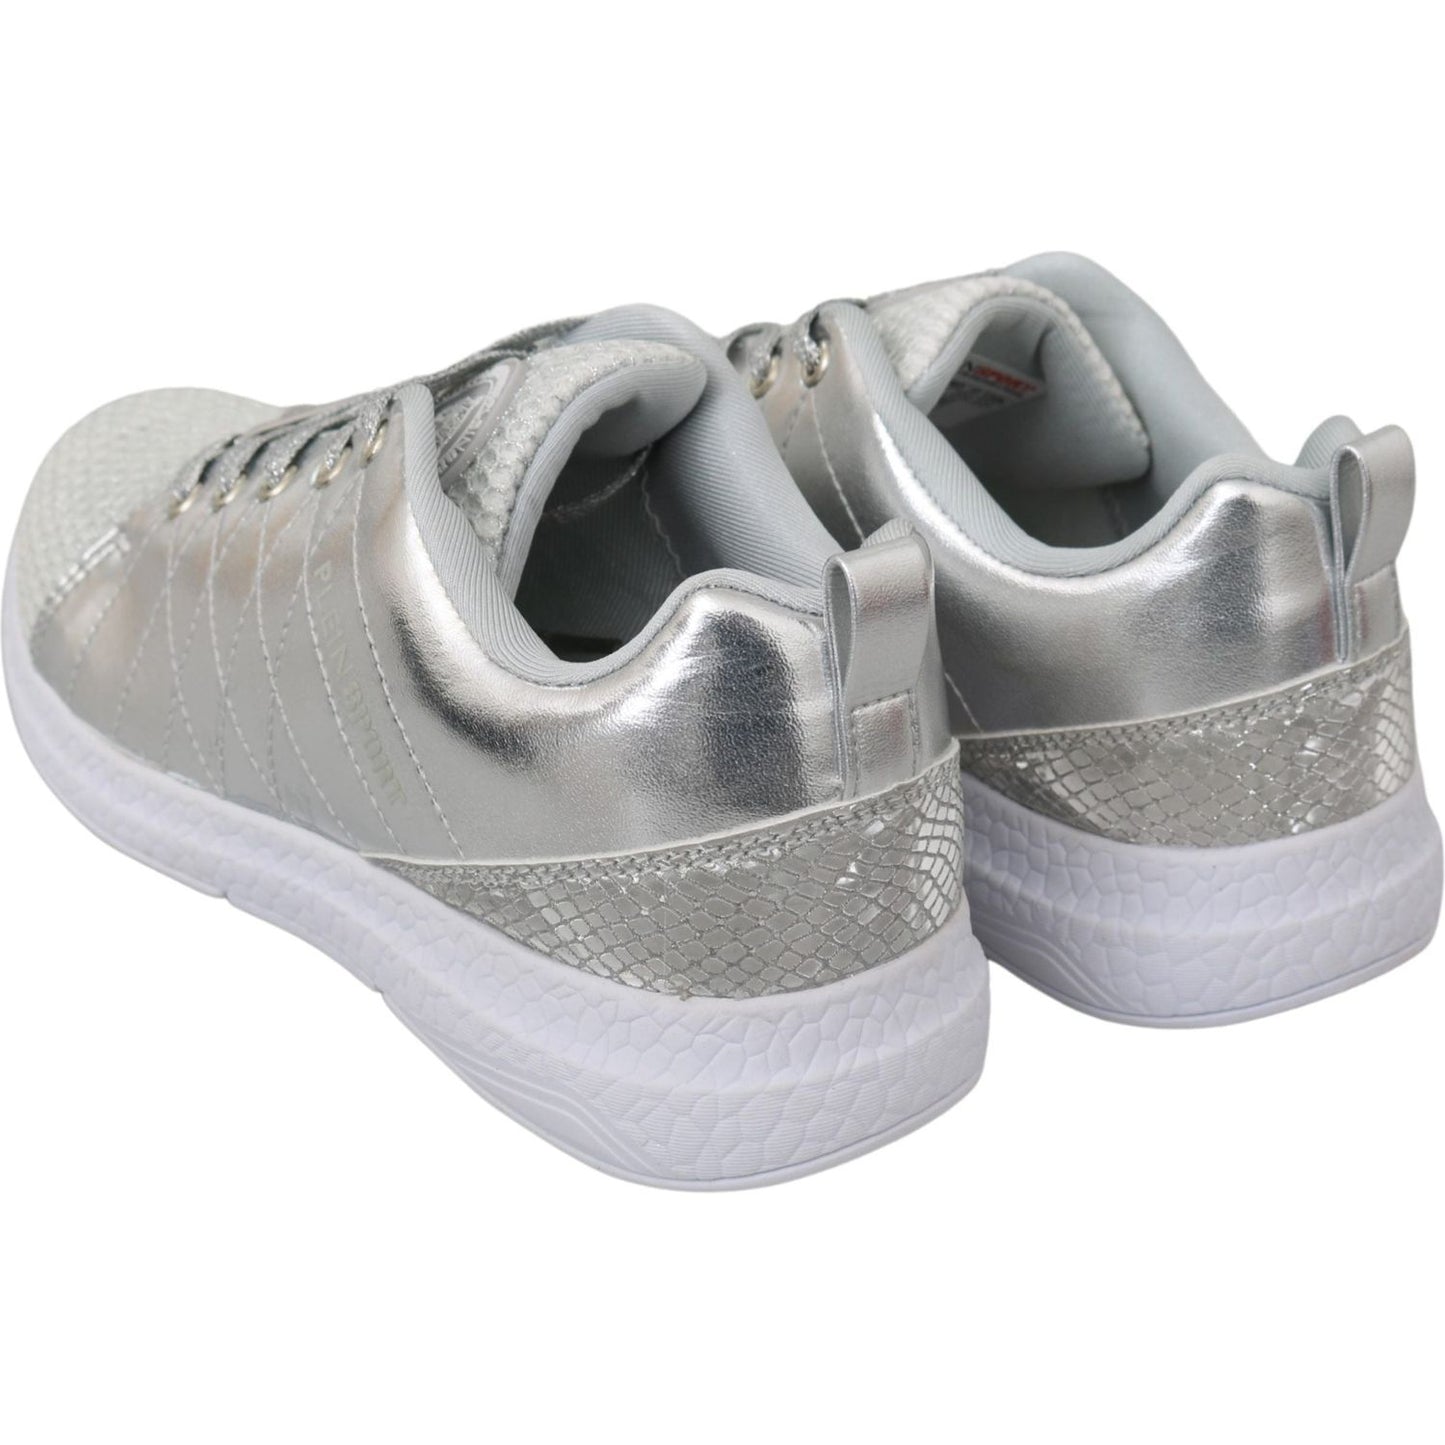 Philipp Plein Sleek Silver Sneakers for Trendsetters WOMAN SNEAKERS gisella-silver-polyester-sneakers-shoes IMG_7660-scaled-922ab3af-4f4.jpg